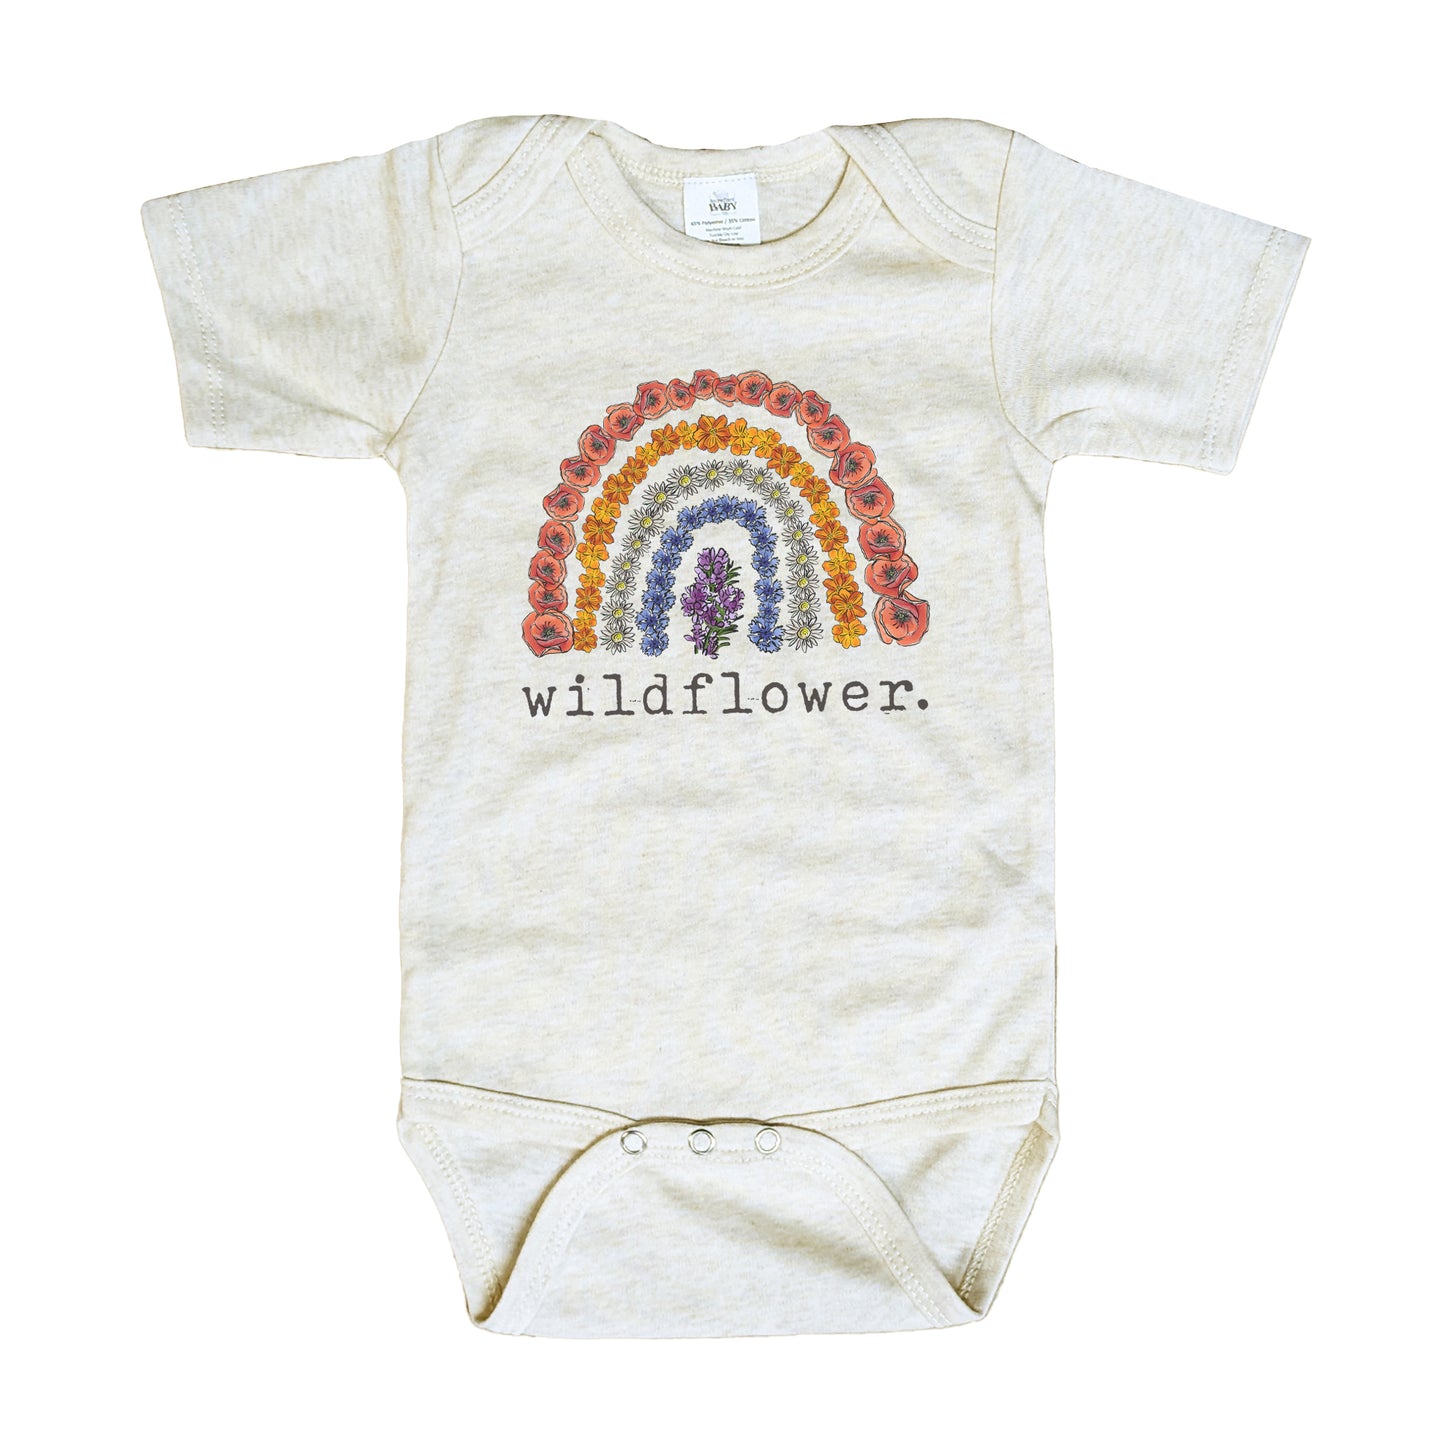 "Wildflower" Nature Baby Outdoor Body Suit for Girls